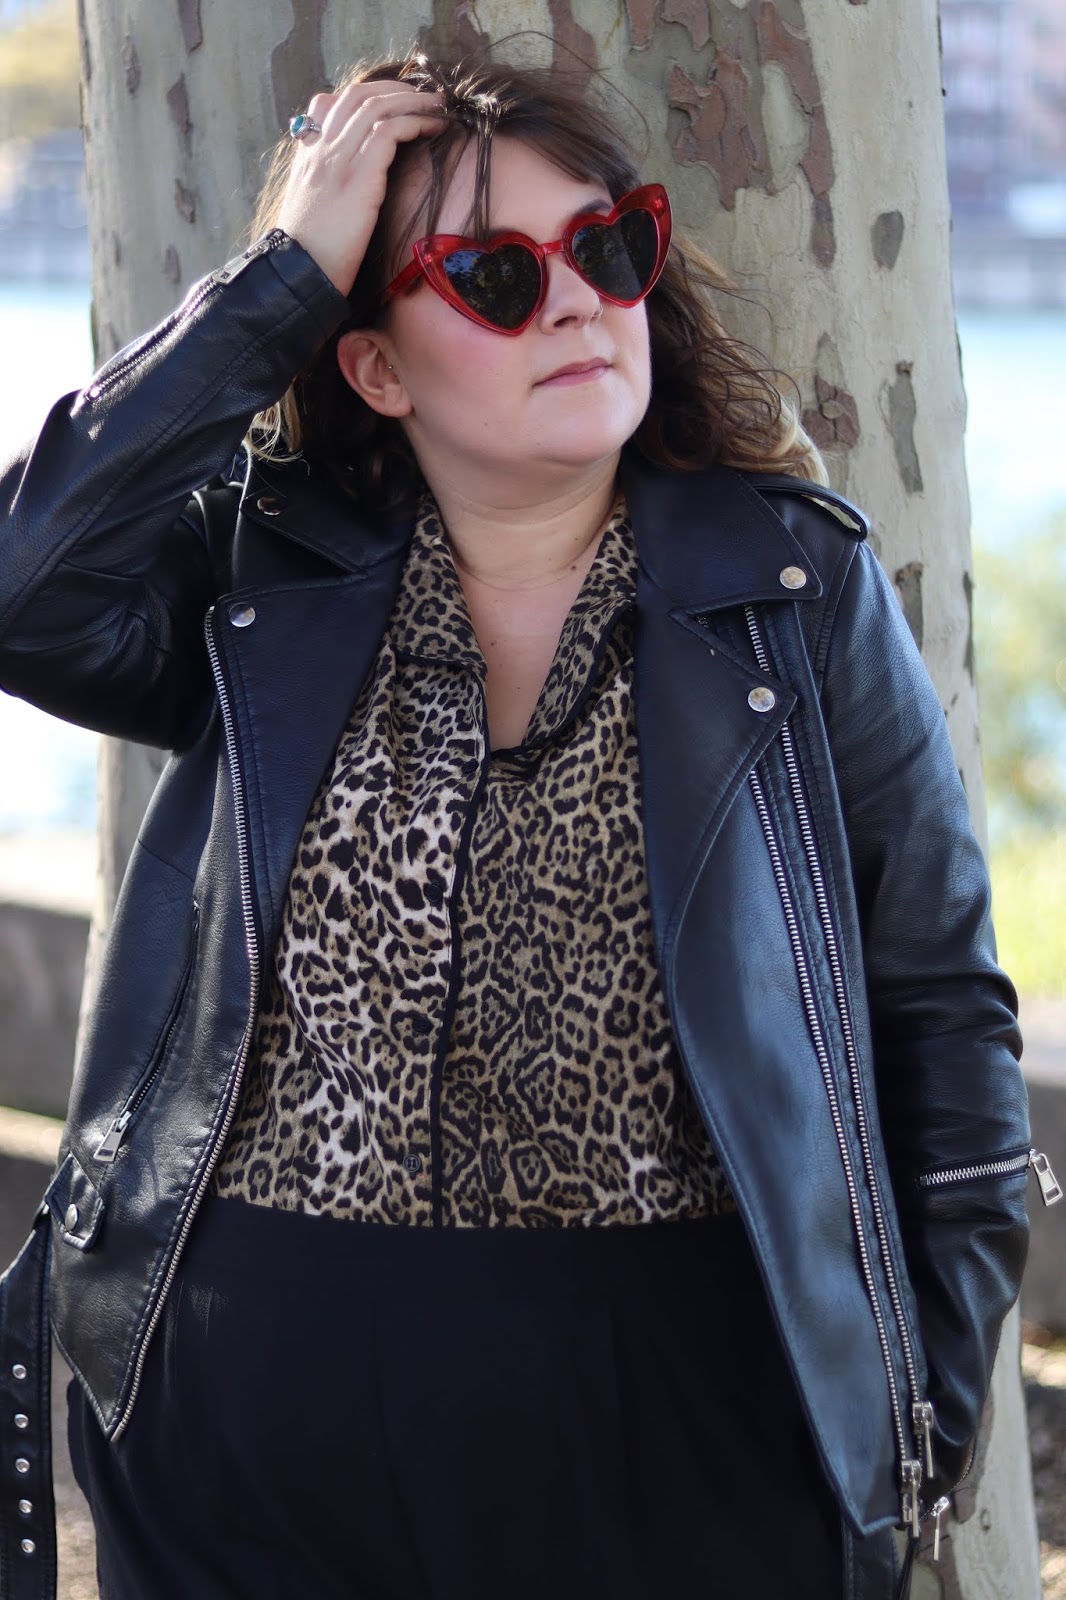  grande taille, blog, plus size, french blogger, lyon, mode, fashion, plus fashion, outfit, grande taille, mode, Lyon, look, plus size, bodypositive, french blogger, curves, loveyourself curvy gang